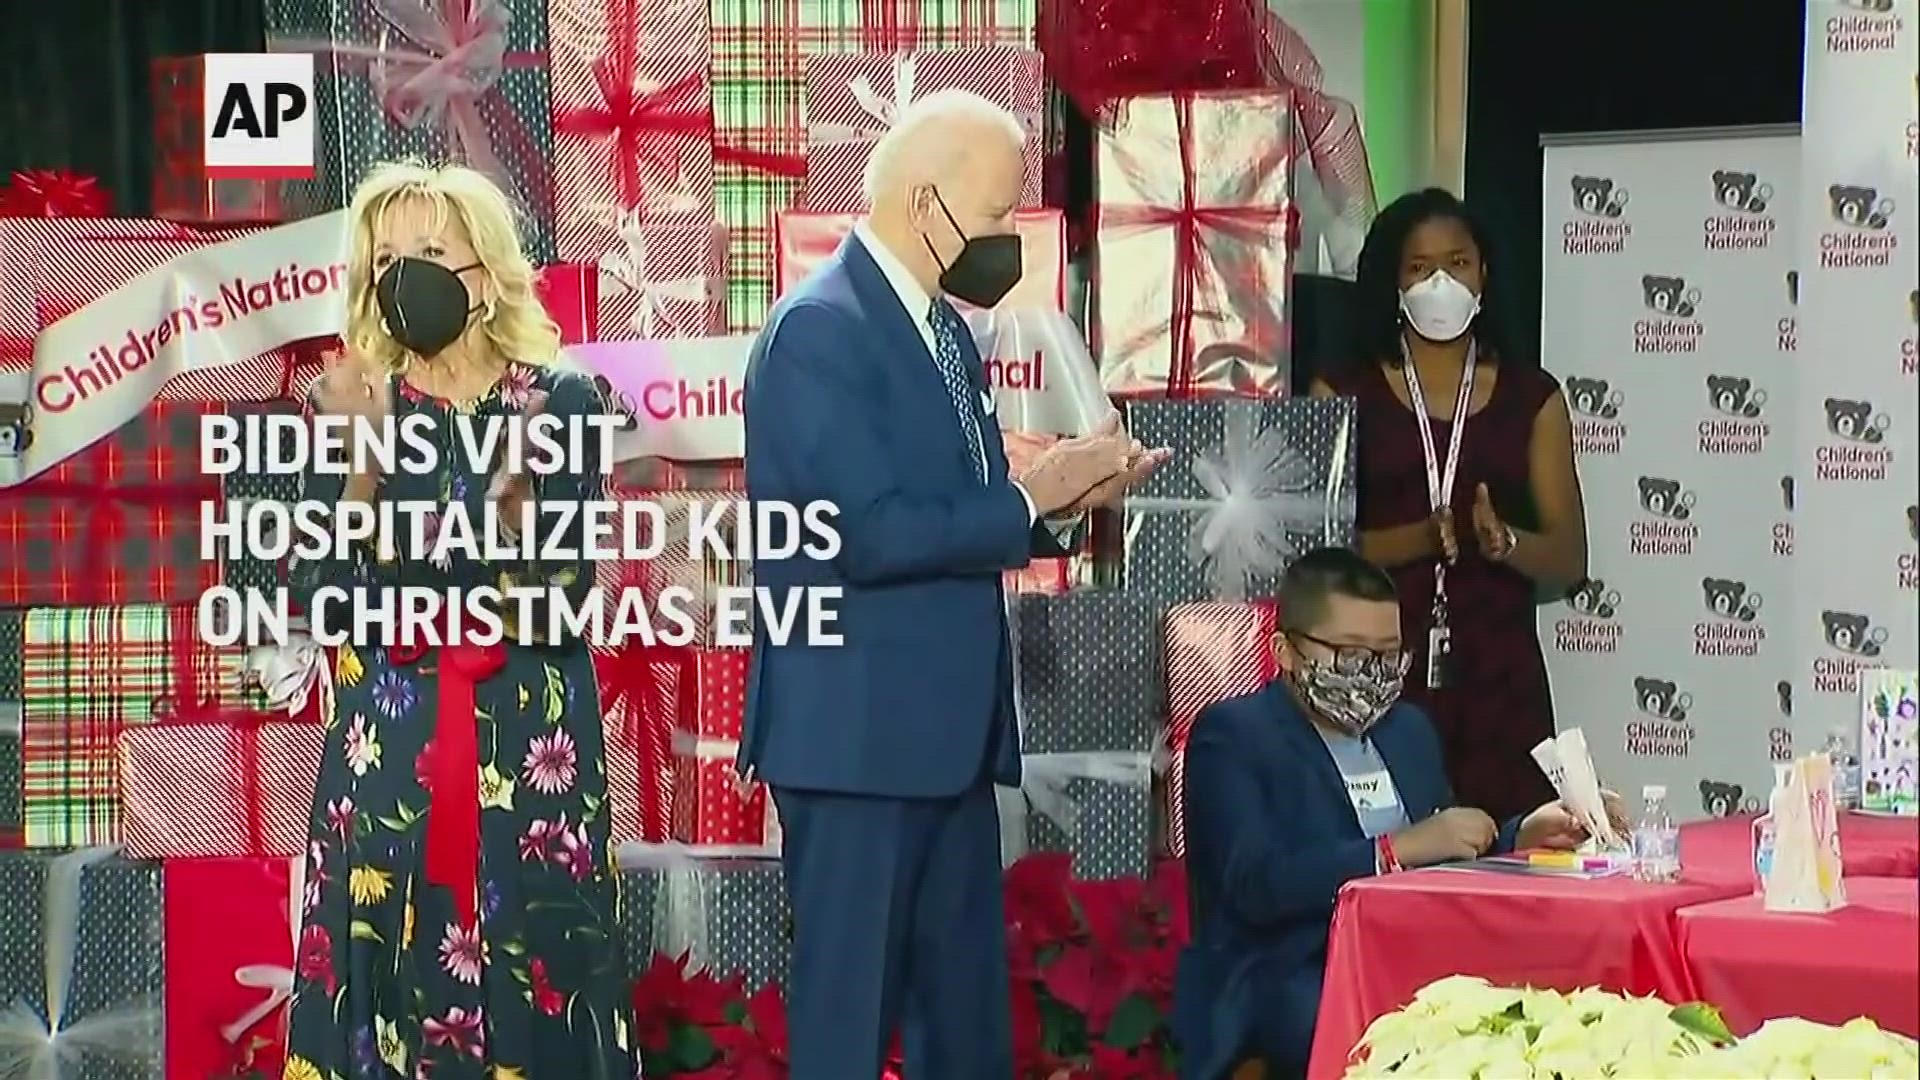 President Joe Biden and first lady Jill Biden brought some Christmas Eve cheer to hospitalized children who aren't well enough to go home for holidays.